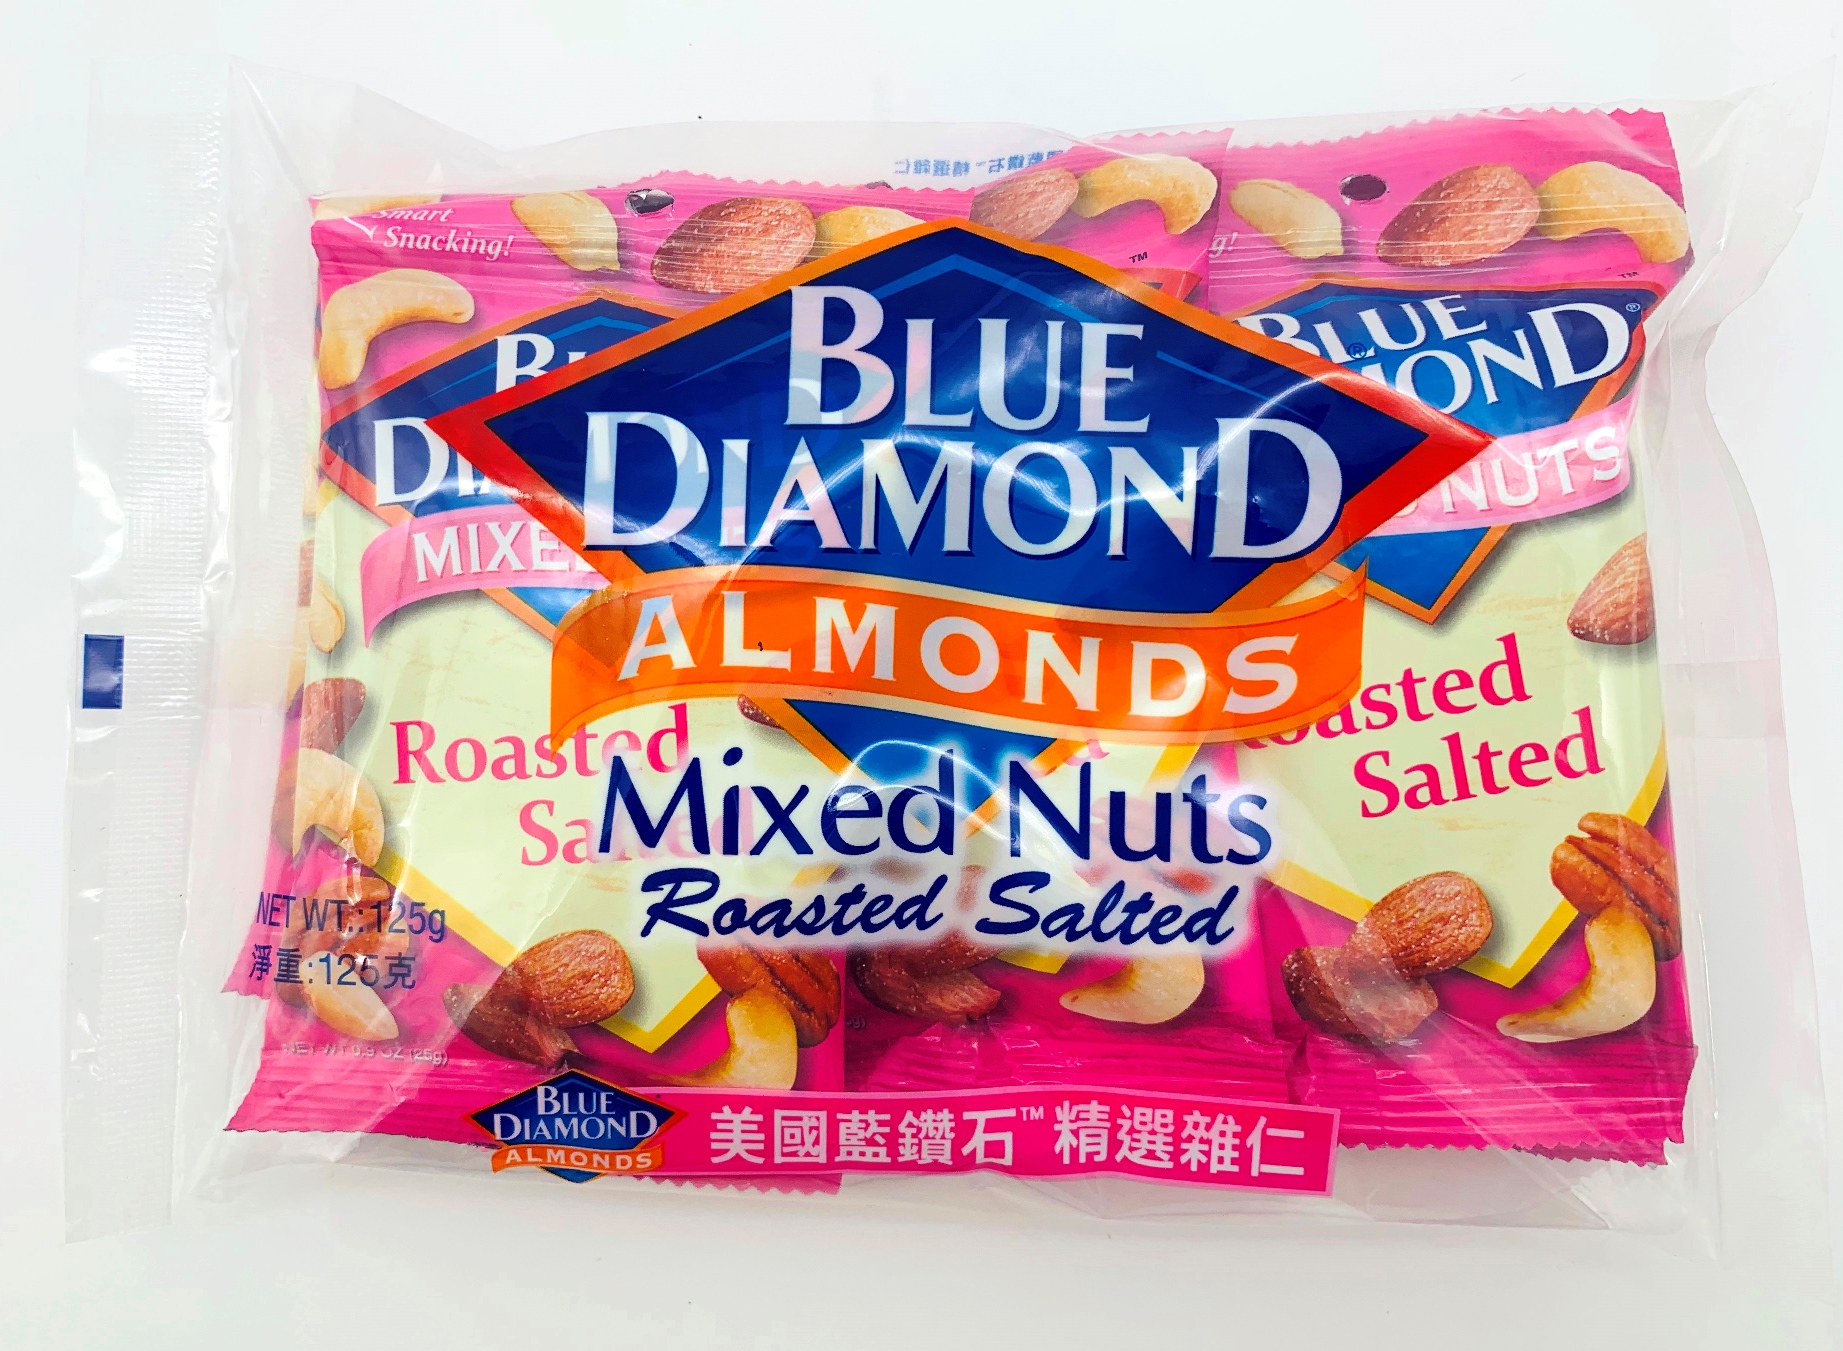 Premium Mixed Nuts (5 bags) 125g